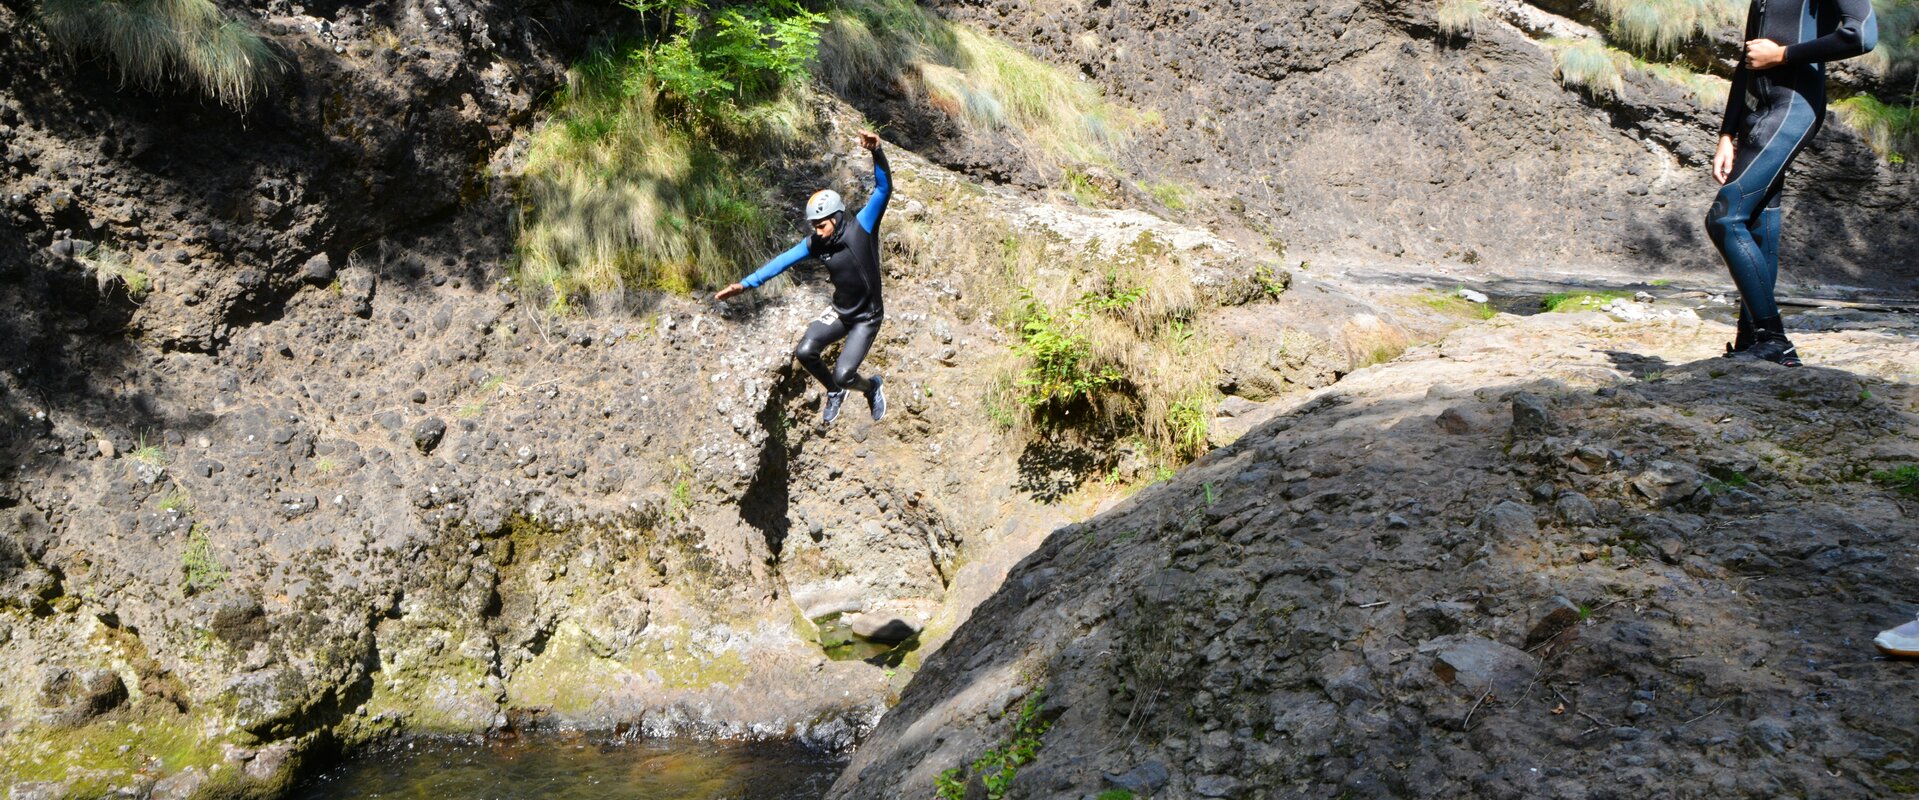 Canyoning Jordanne - Cantal Auvergne